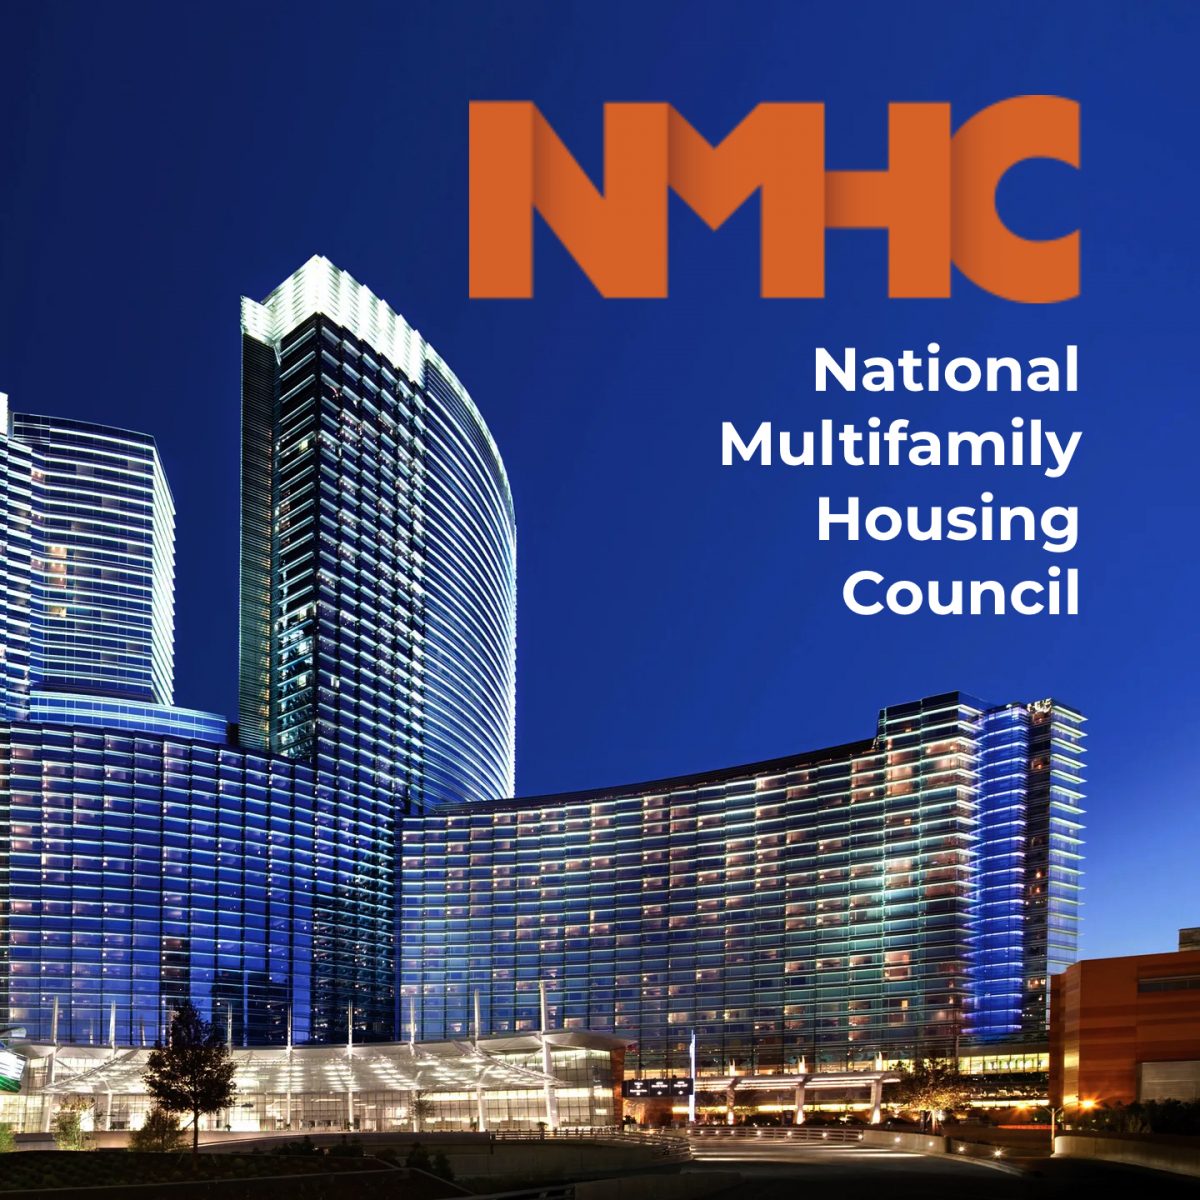 NMHC 2023 Conference PROPERTY ORGANIZATION